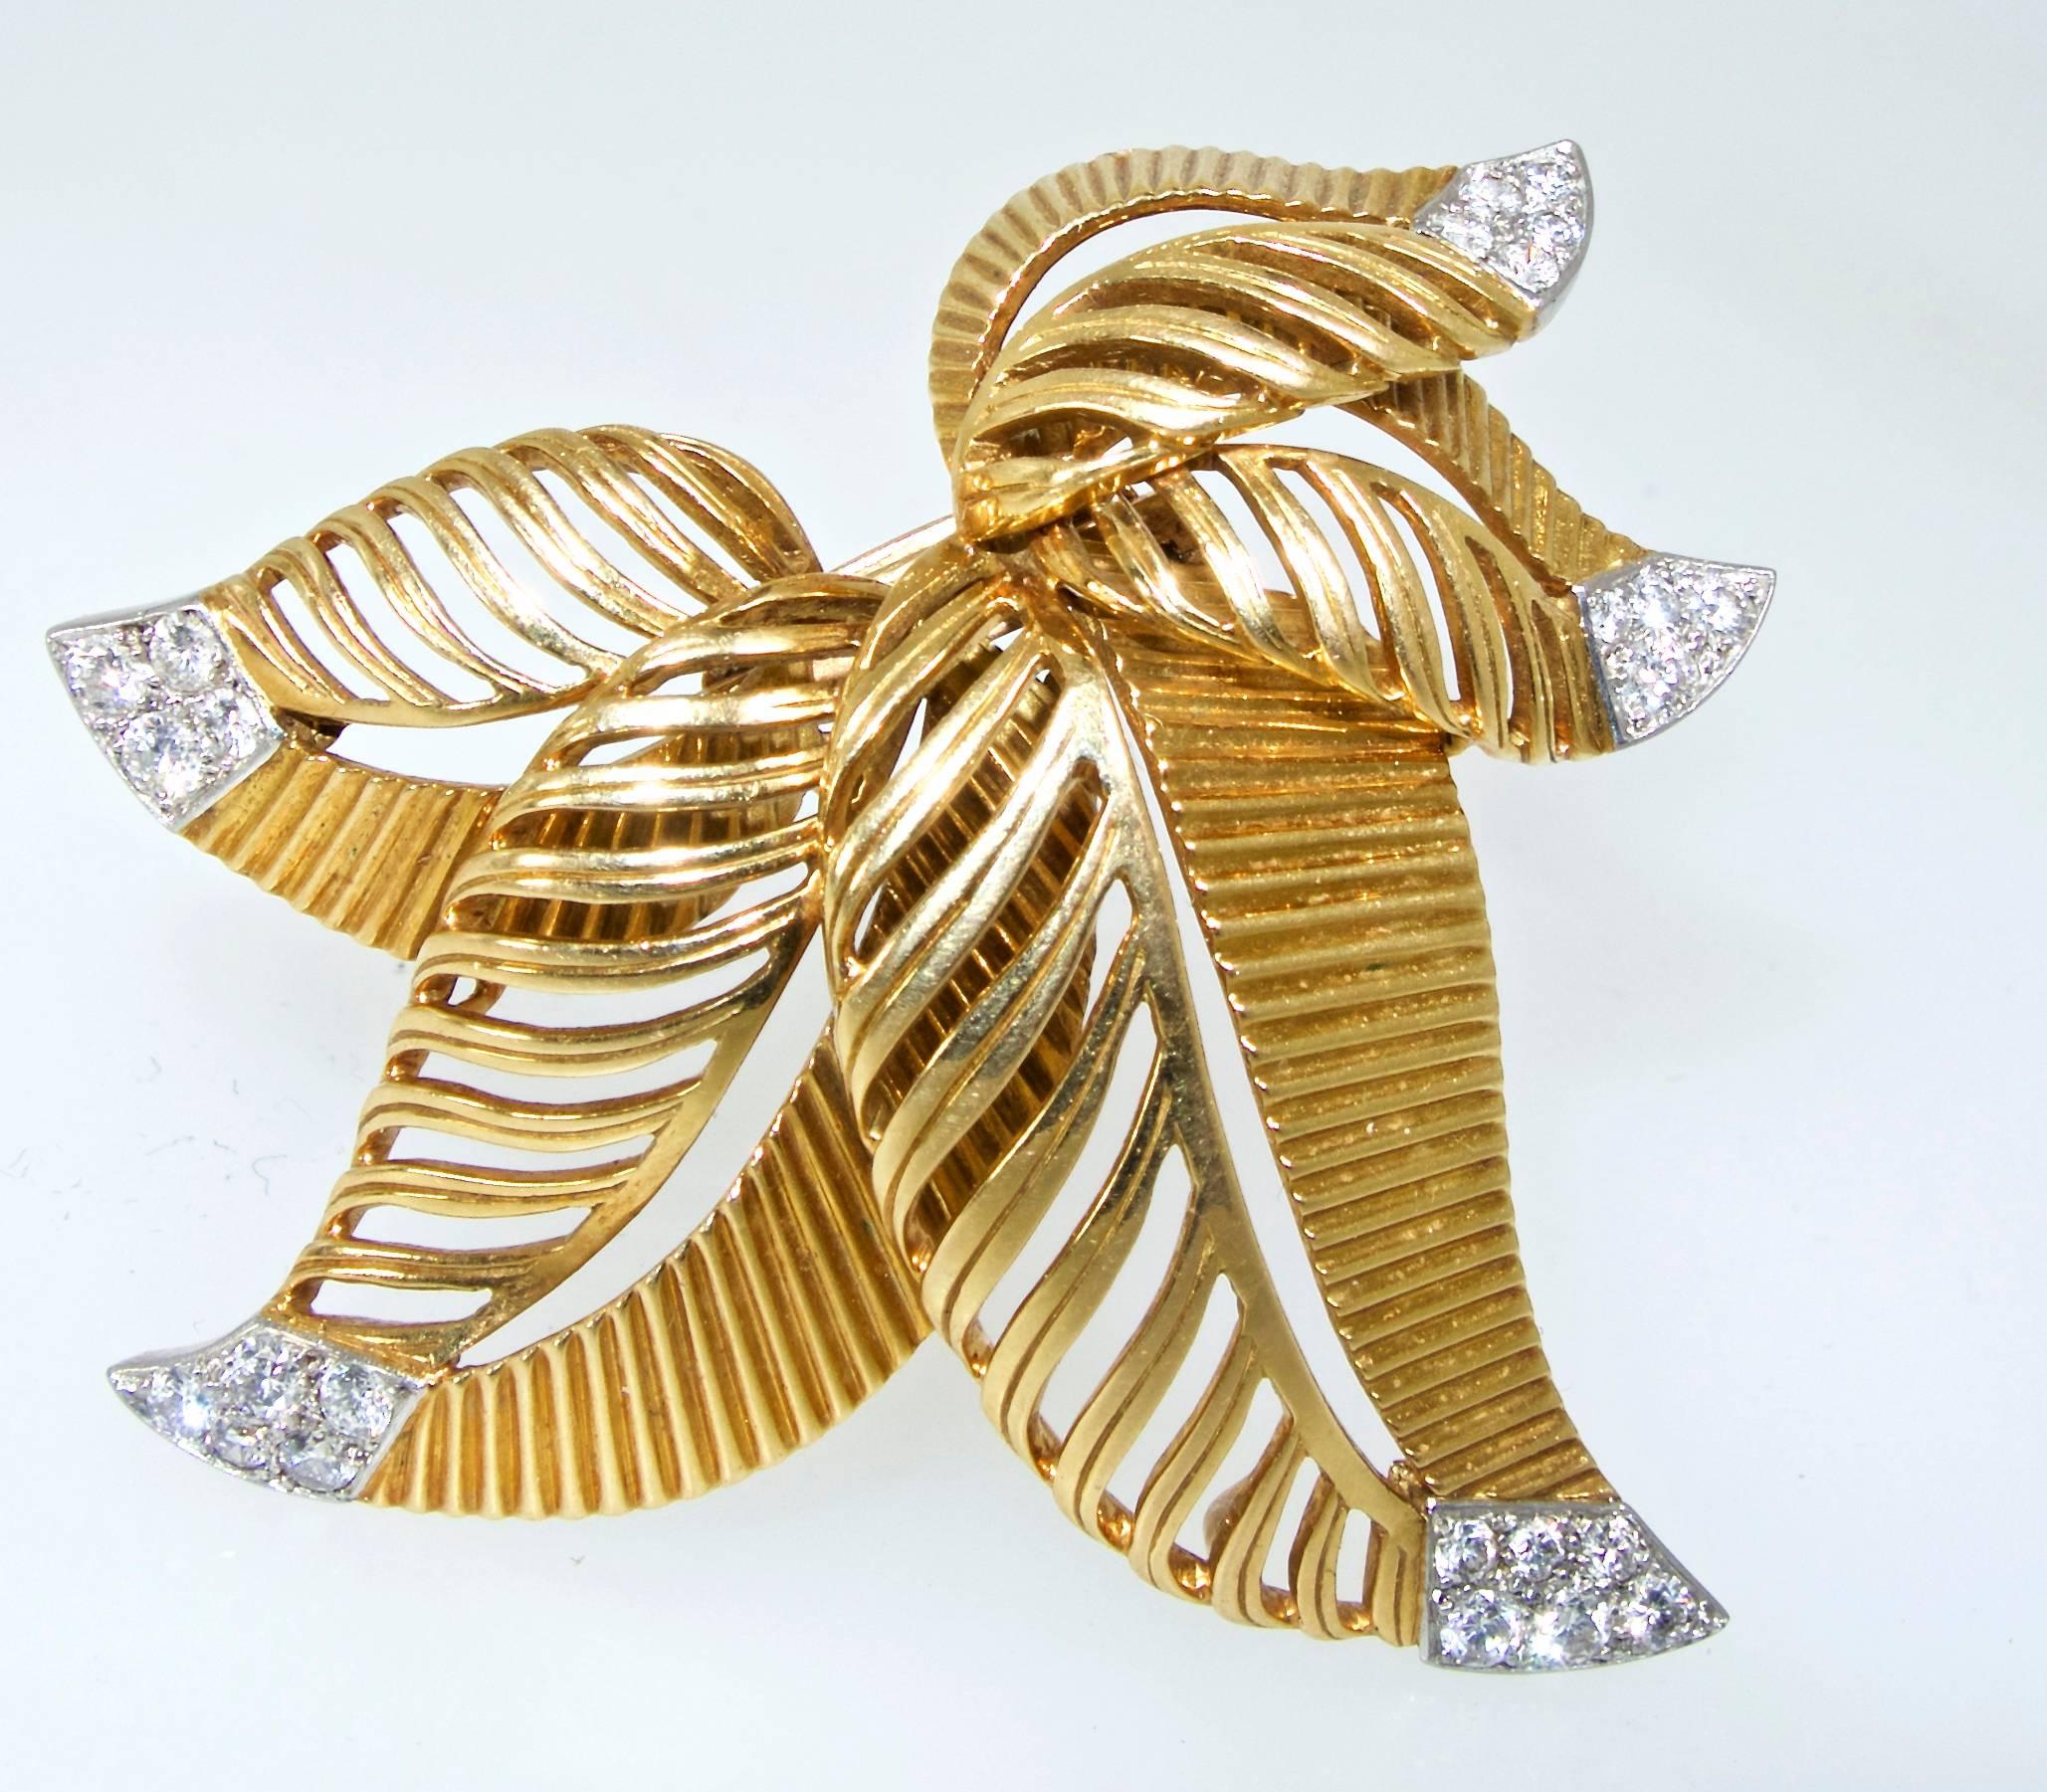 18K and platinum brooch/double-clip possessing fine white diamonds.  There are 24 diamonds weighing approximately .70 cts.  Signed and numbered, this clip is 2.0 inches by 1.75 inches.